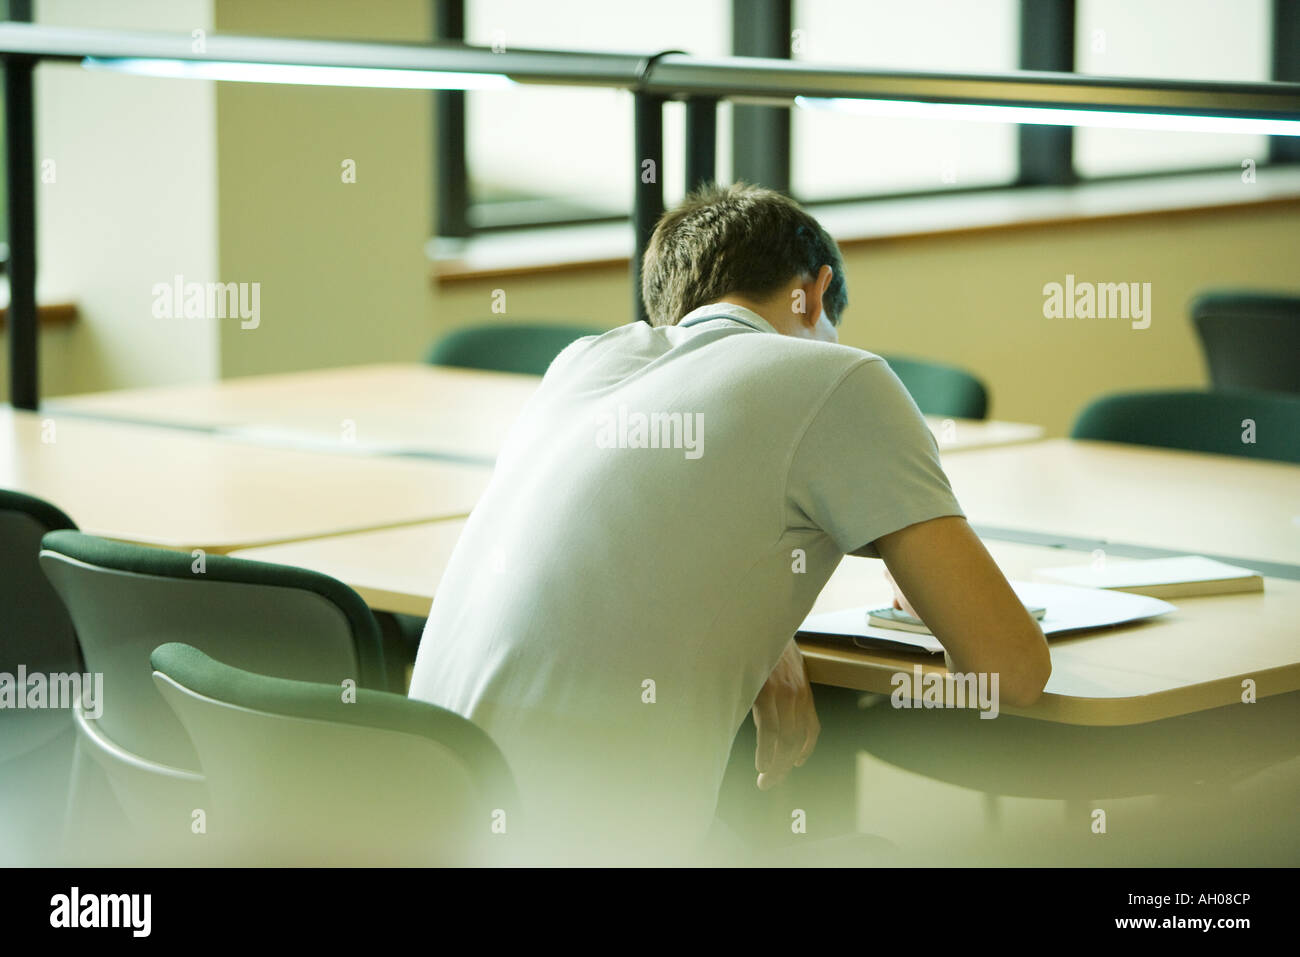 Male student studying, rear view Stock Photo